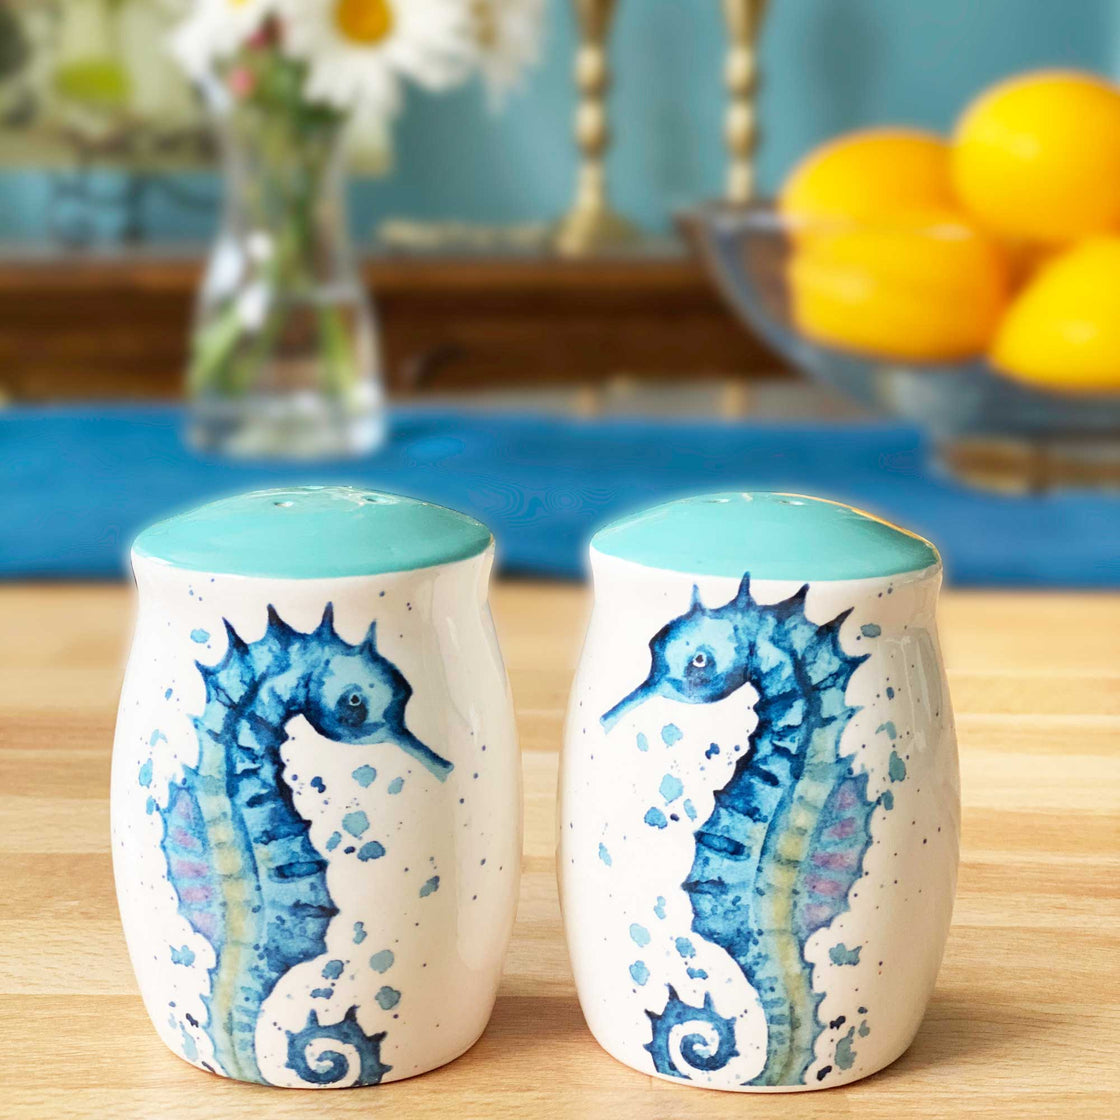 rengora seahorse salt and pepper shakers on table with lemons and daisies in the background